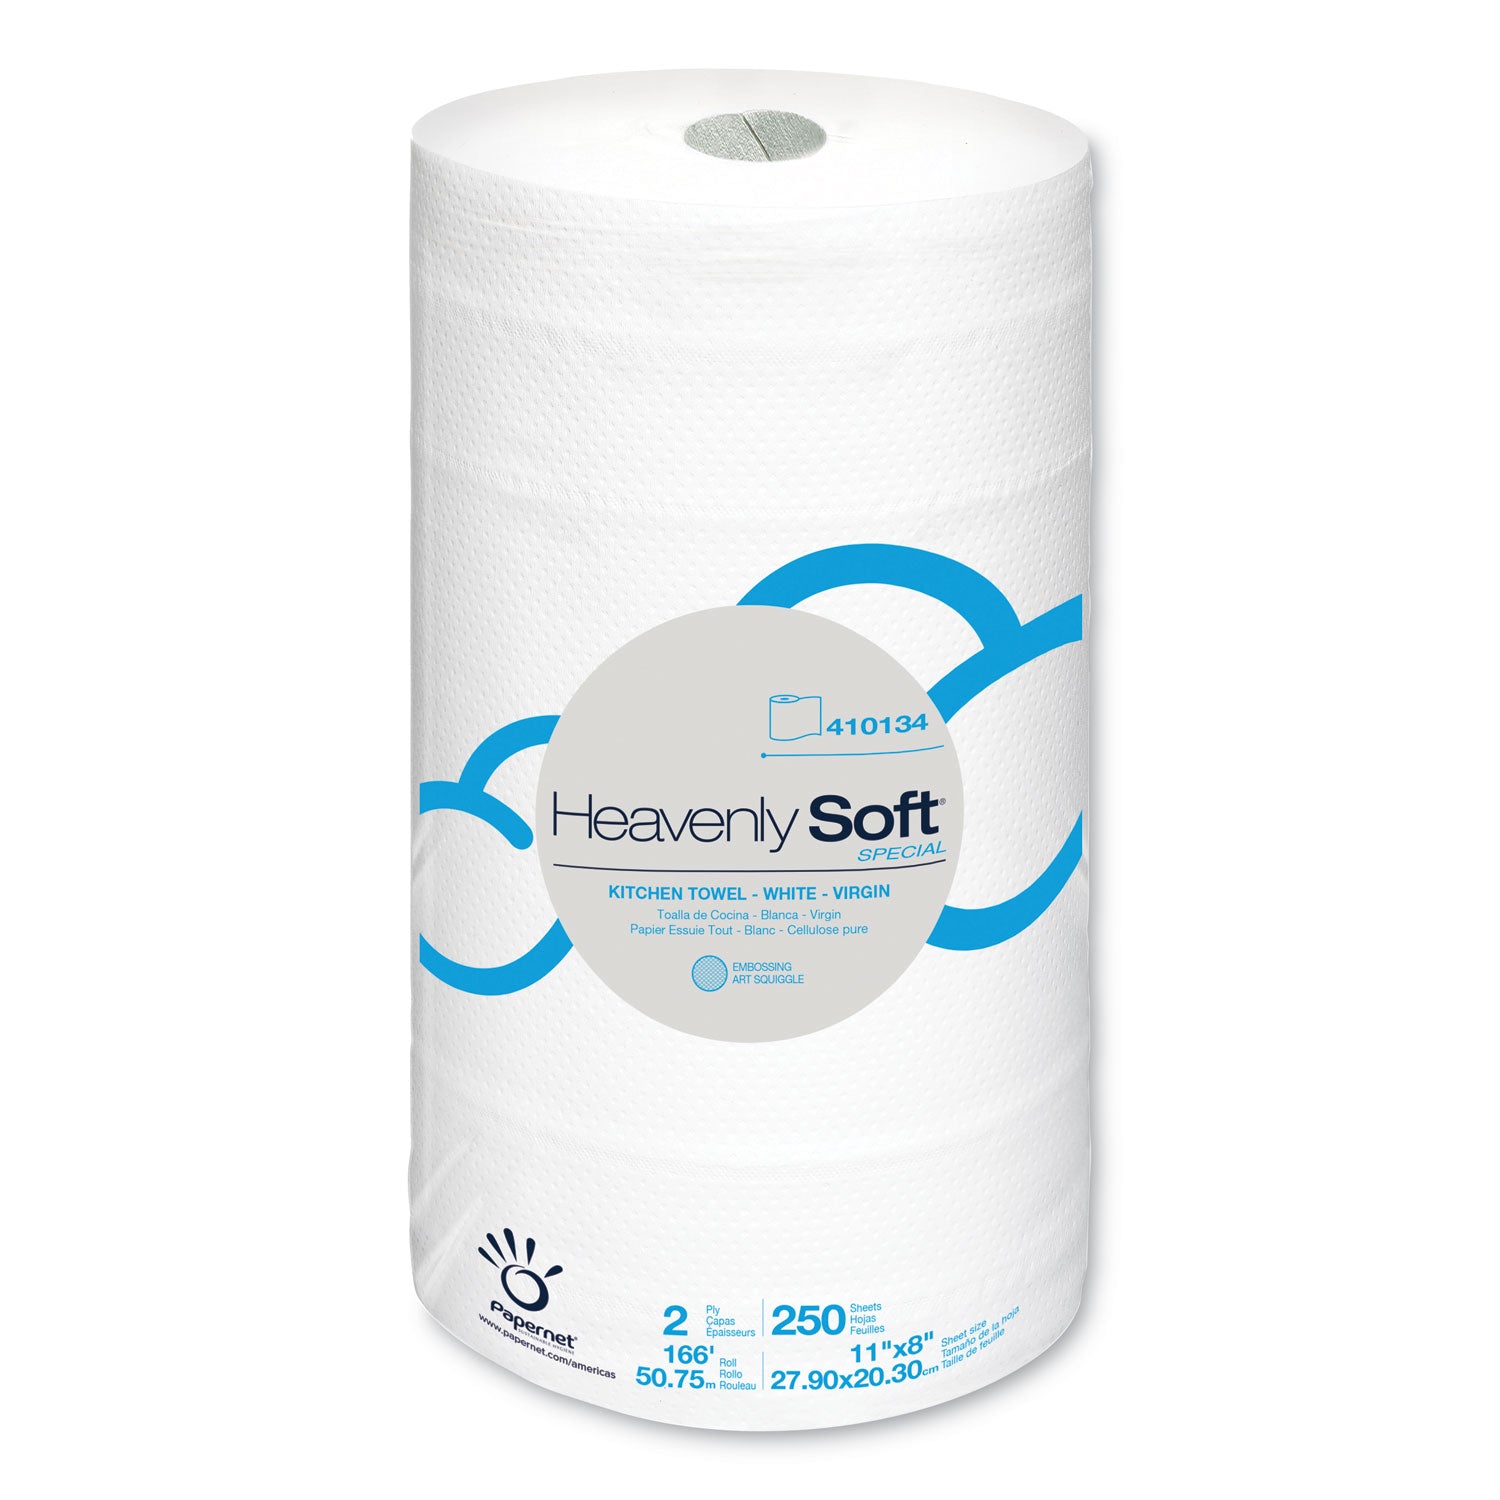 heavenly-soft-kitchen-paper-towel-special-2-ply-11-x-167-ft-white-12-rolls-carton_sod410134 - 1